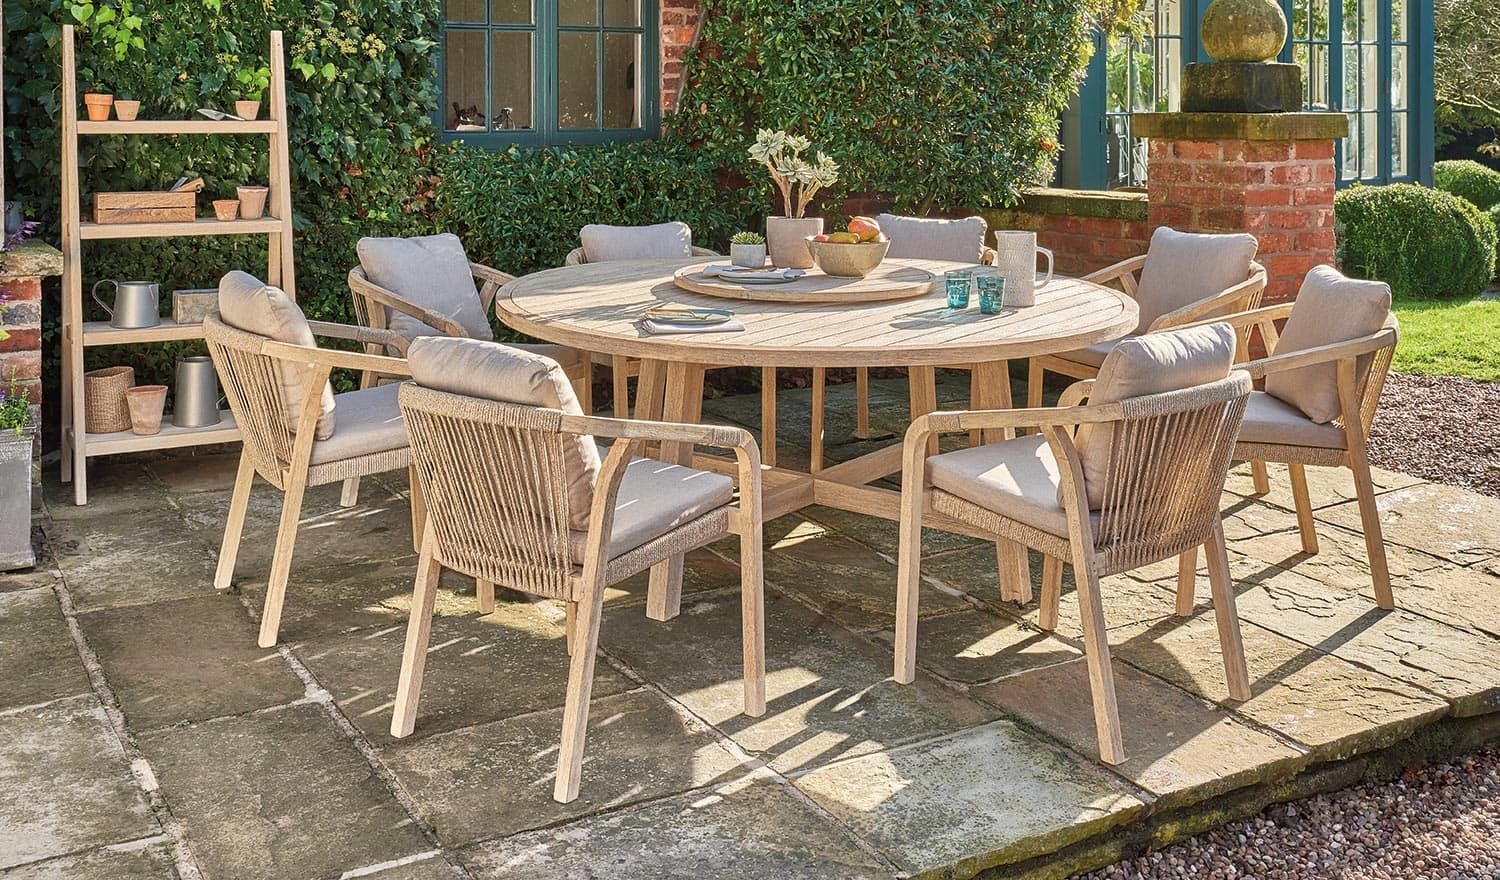 Cora 180cm Round Dining Table 8 Seater, Wooden Round Garden Table And Chairs Set